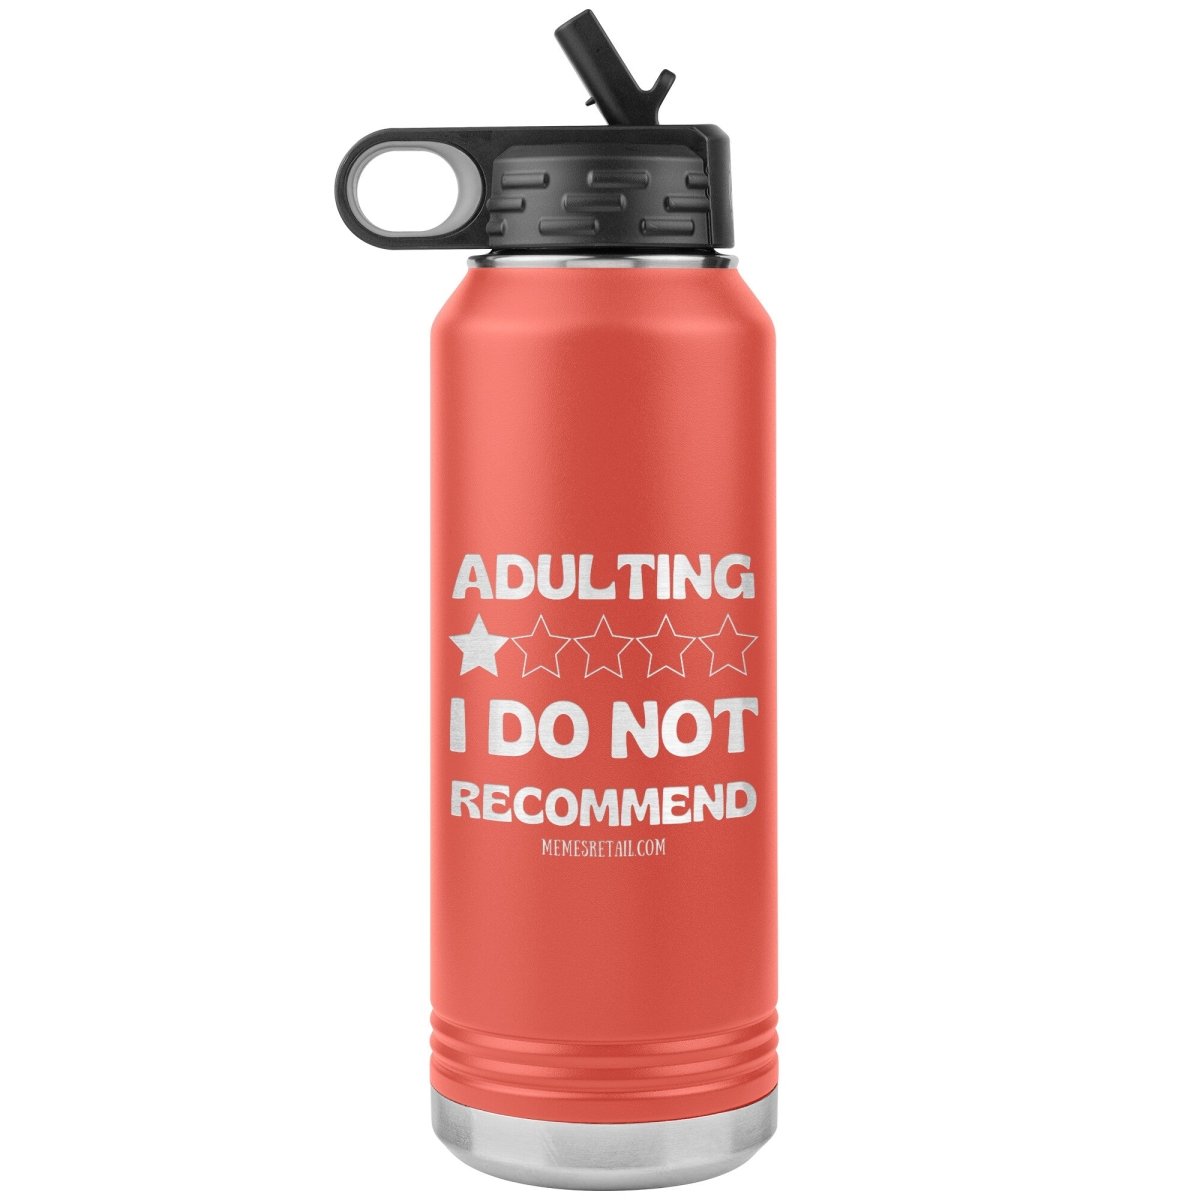 Adulting, 1 Star, I do not recommend 32oz Water Tumblers, Coral - MemesRetail.com